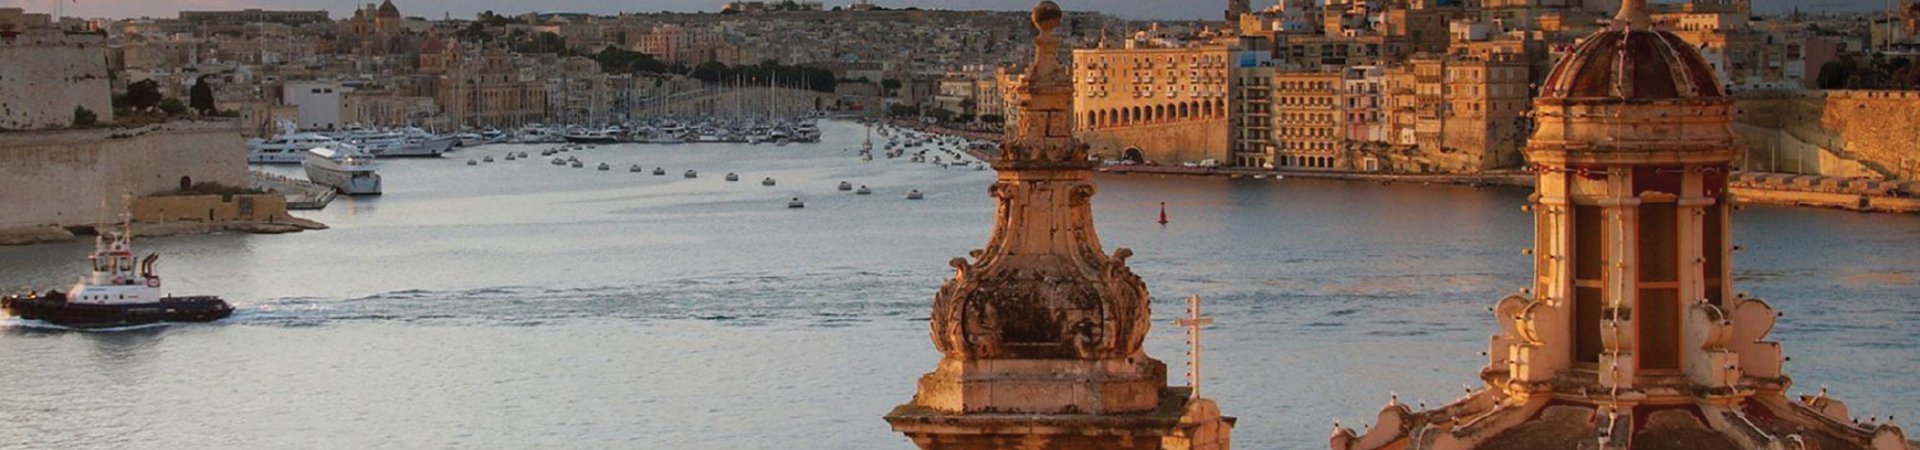 About Malta Gauci and Partners Advocates, malta law firm, malta lawyers, legal services malta, tax services malta, corporate law malta, commercial law malta, finance law malta, marine law malta